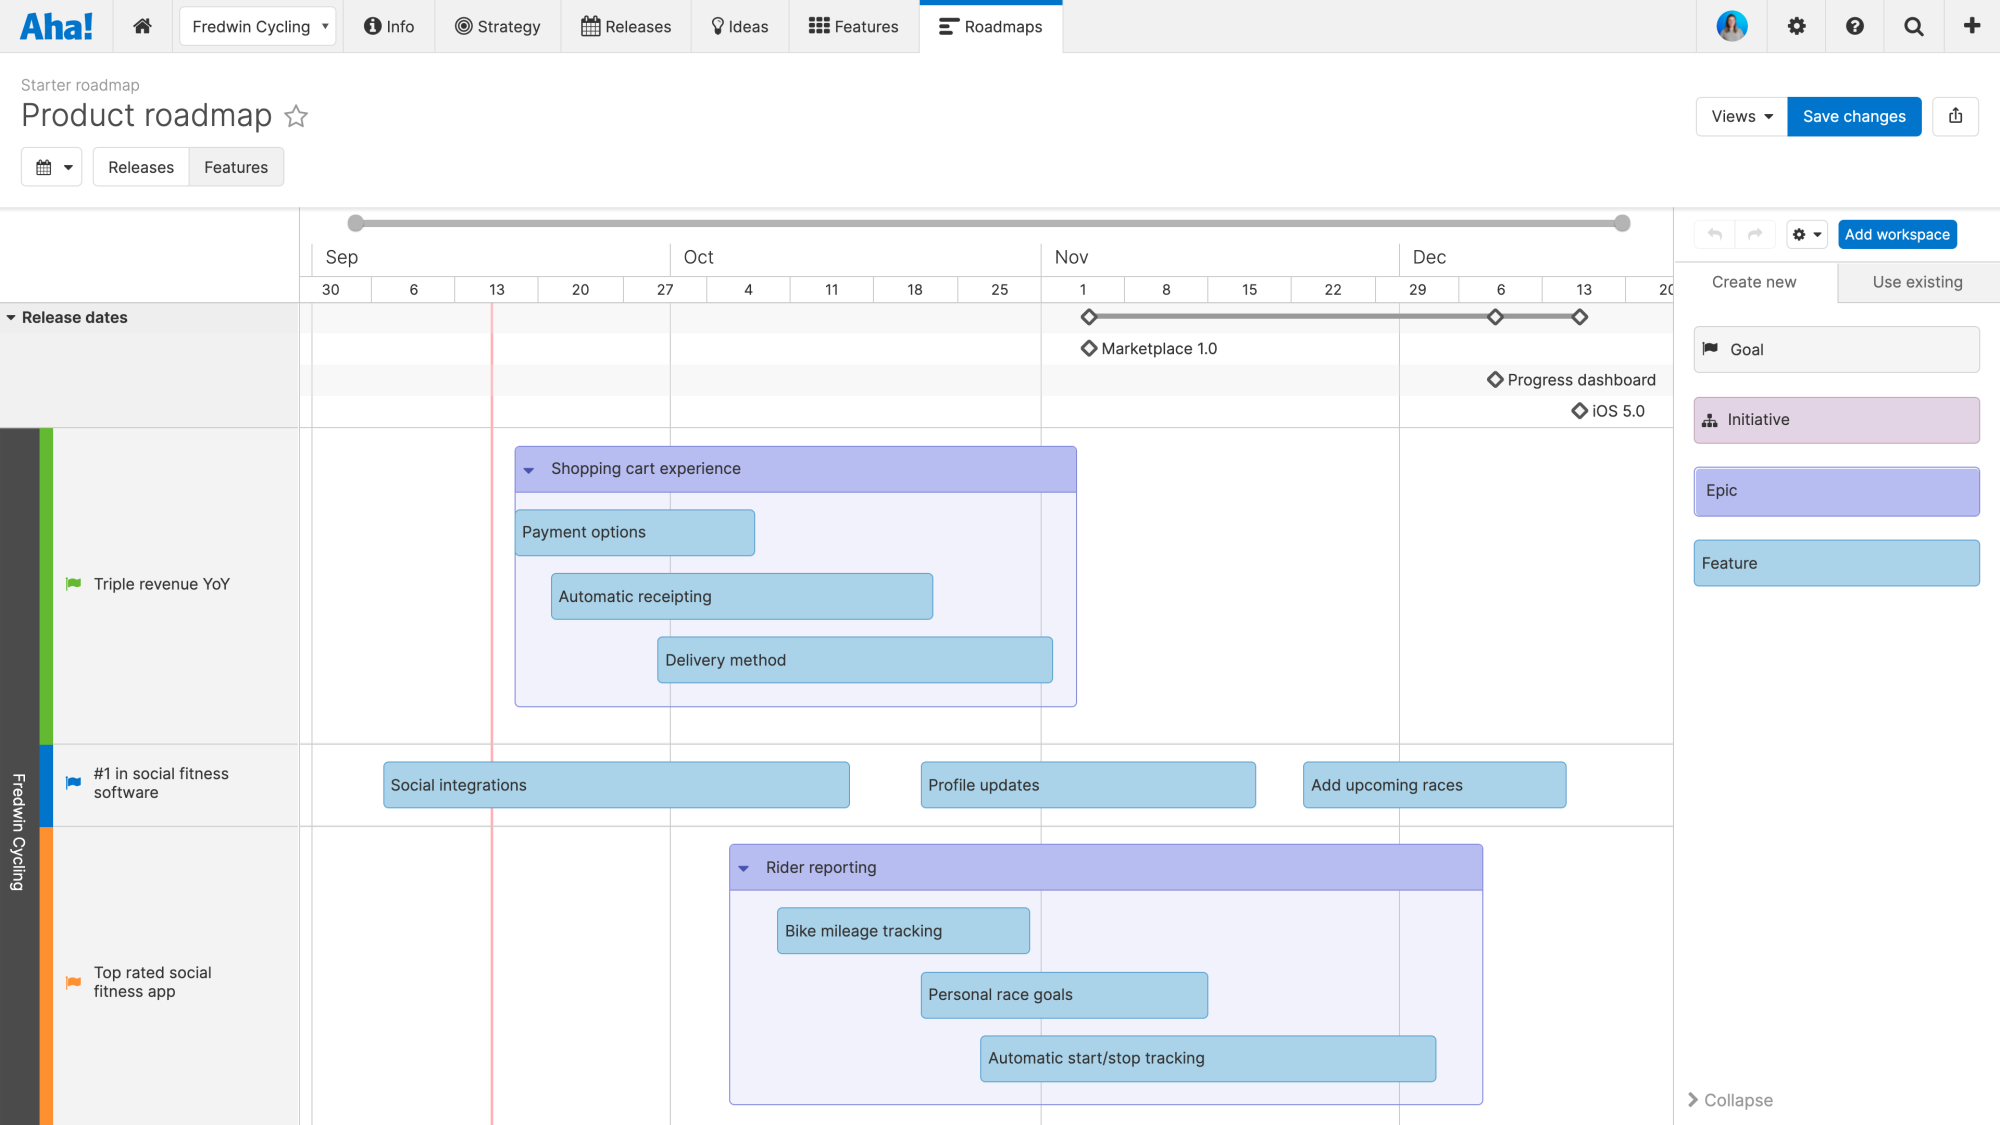 An example of a starter roadmap in Aha!